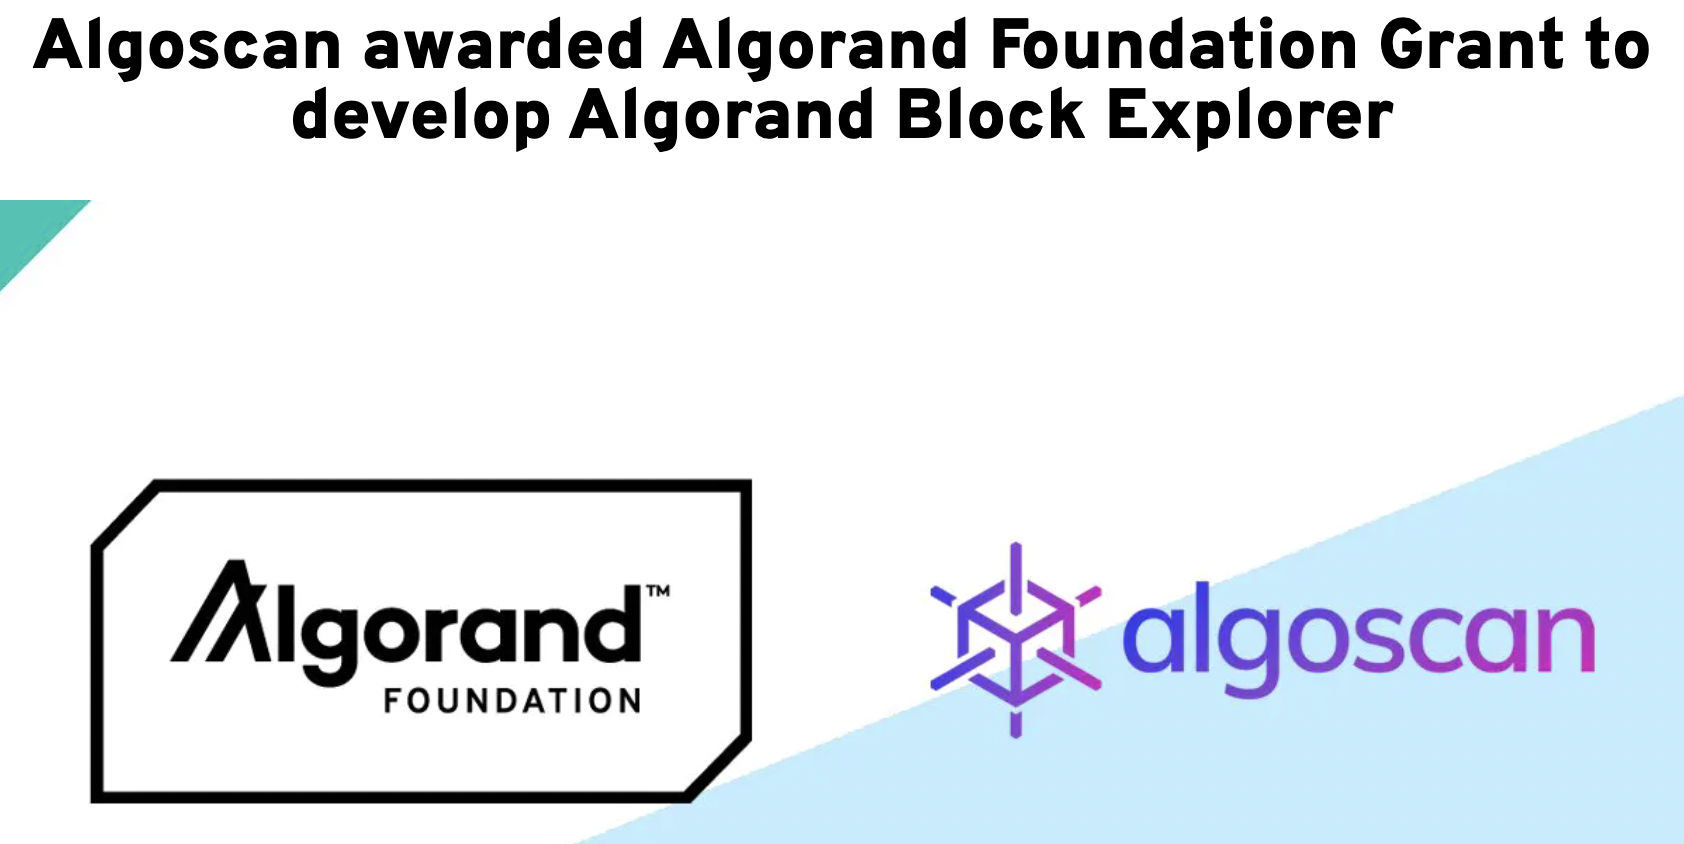 Sample grant given by the Algorand Foundation to Algoscan